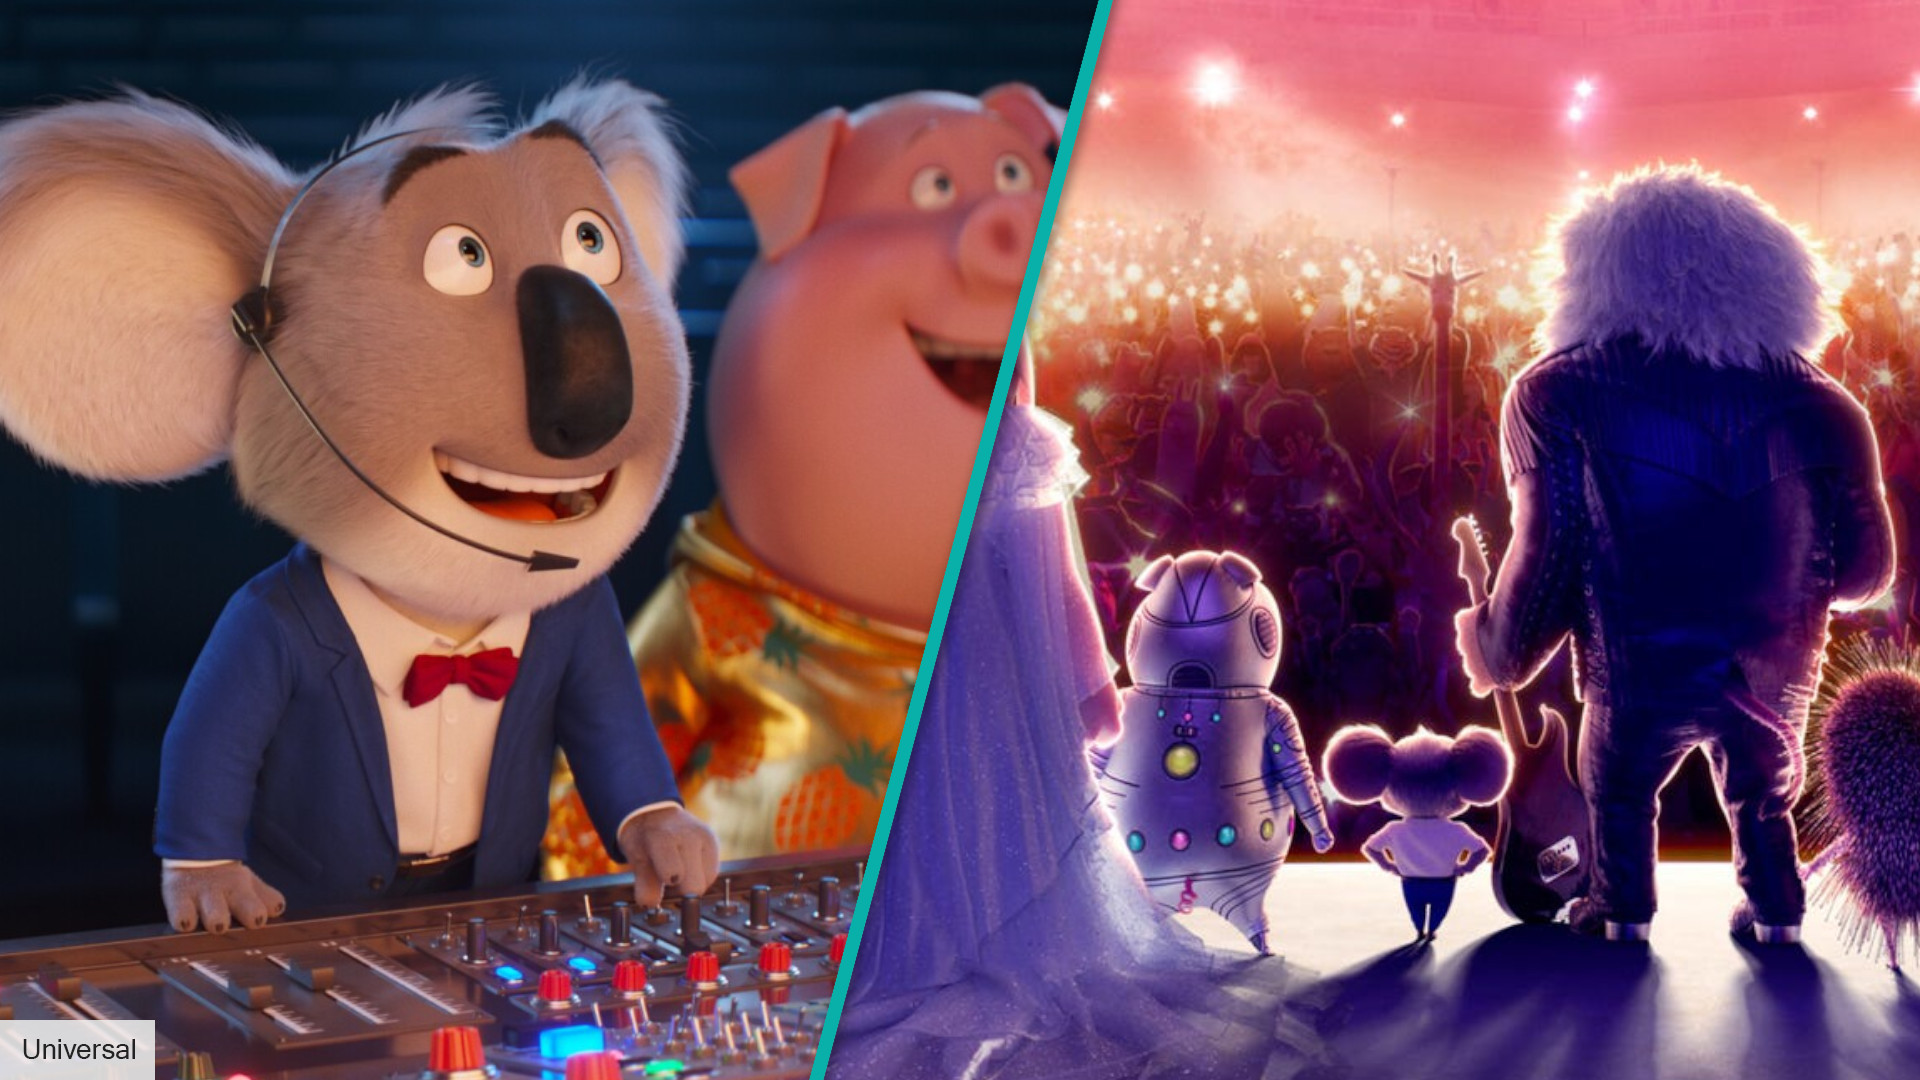 Sing 2 becomes highest grossing animated movie in pandemic | The Digital Fix